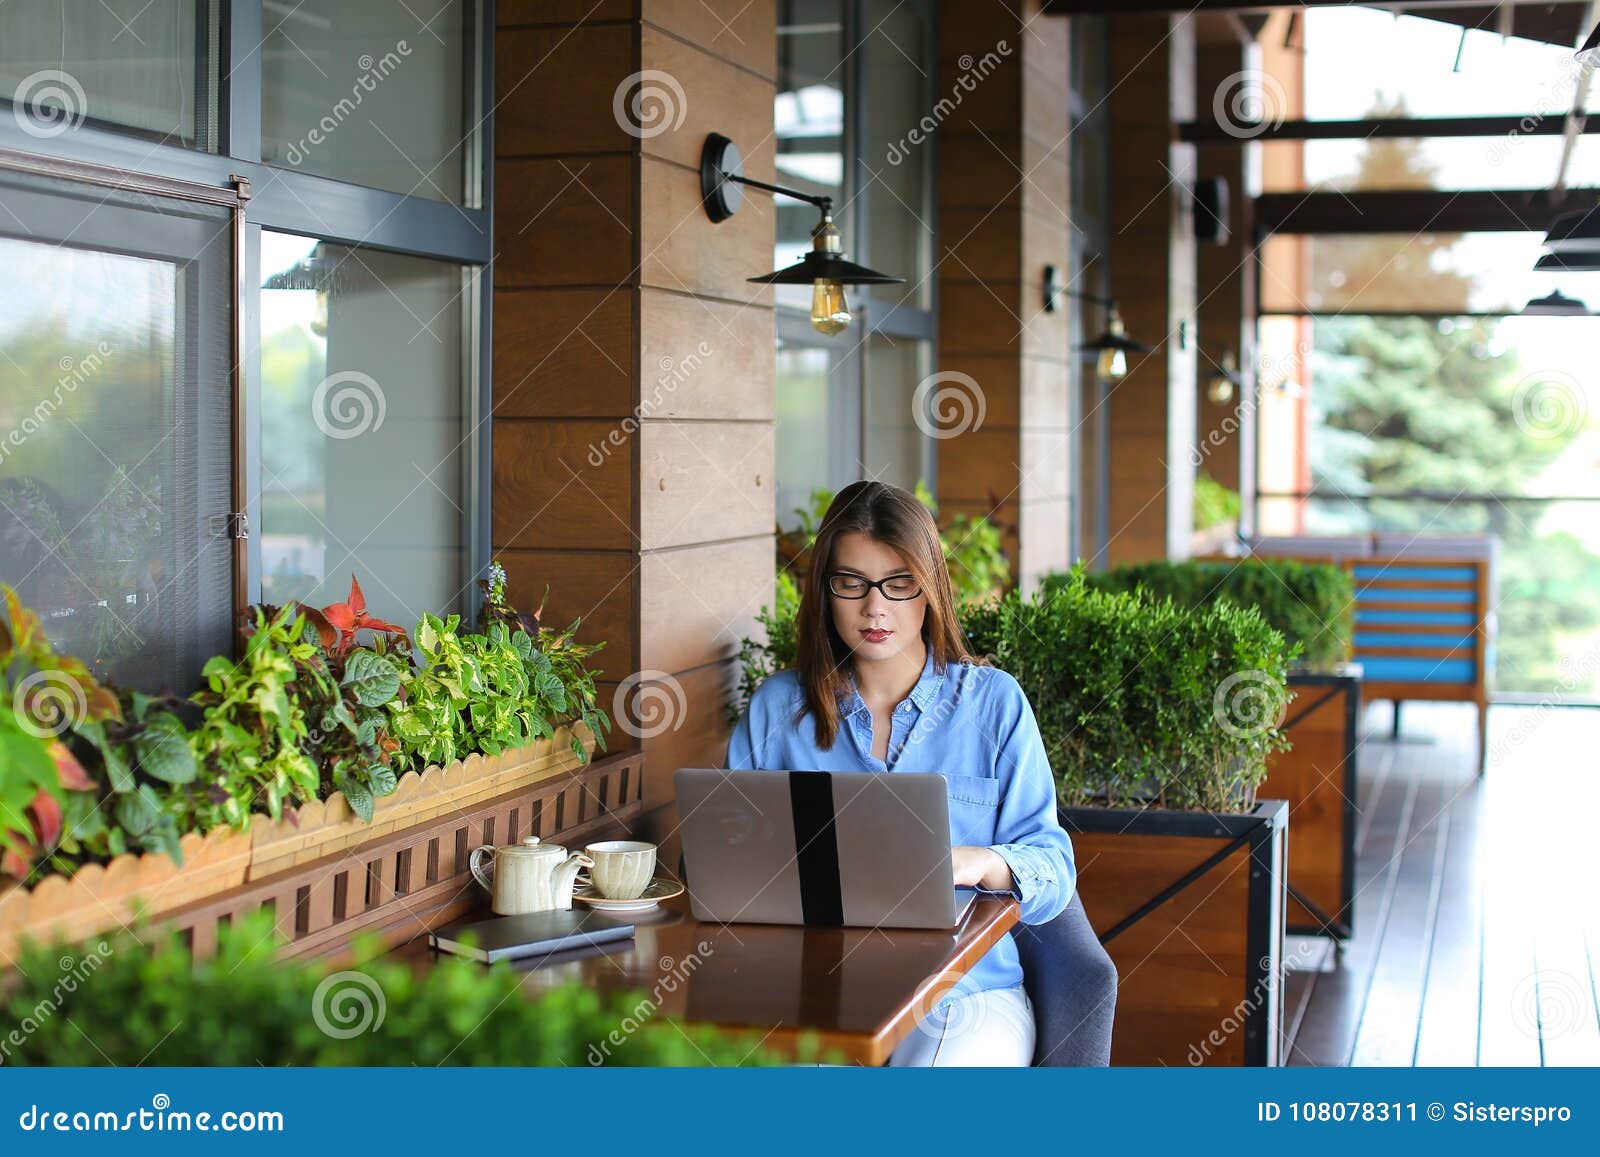 Beautiful Student Working with Laptop at Restaurant. Stock Image ...